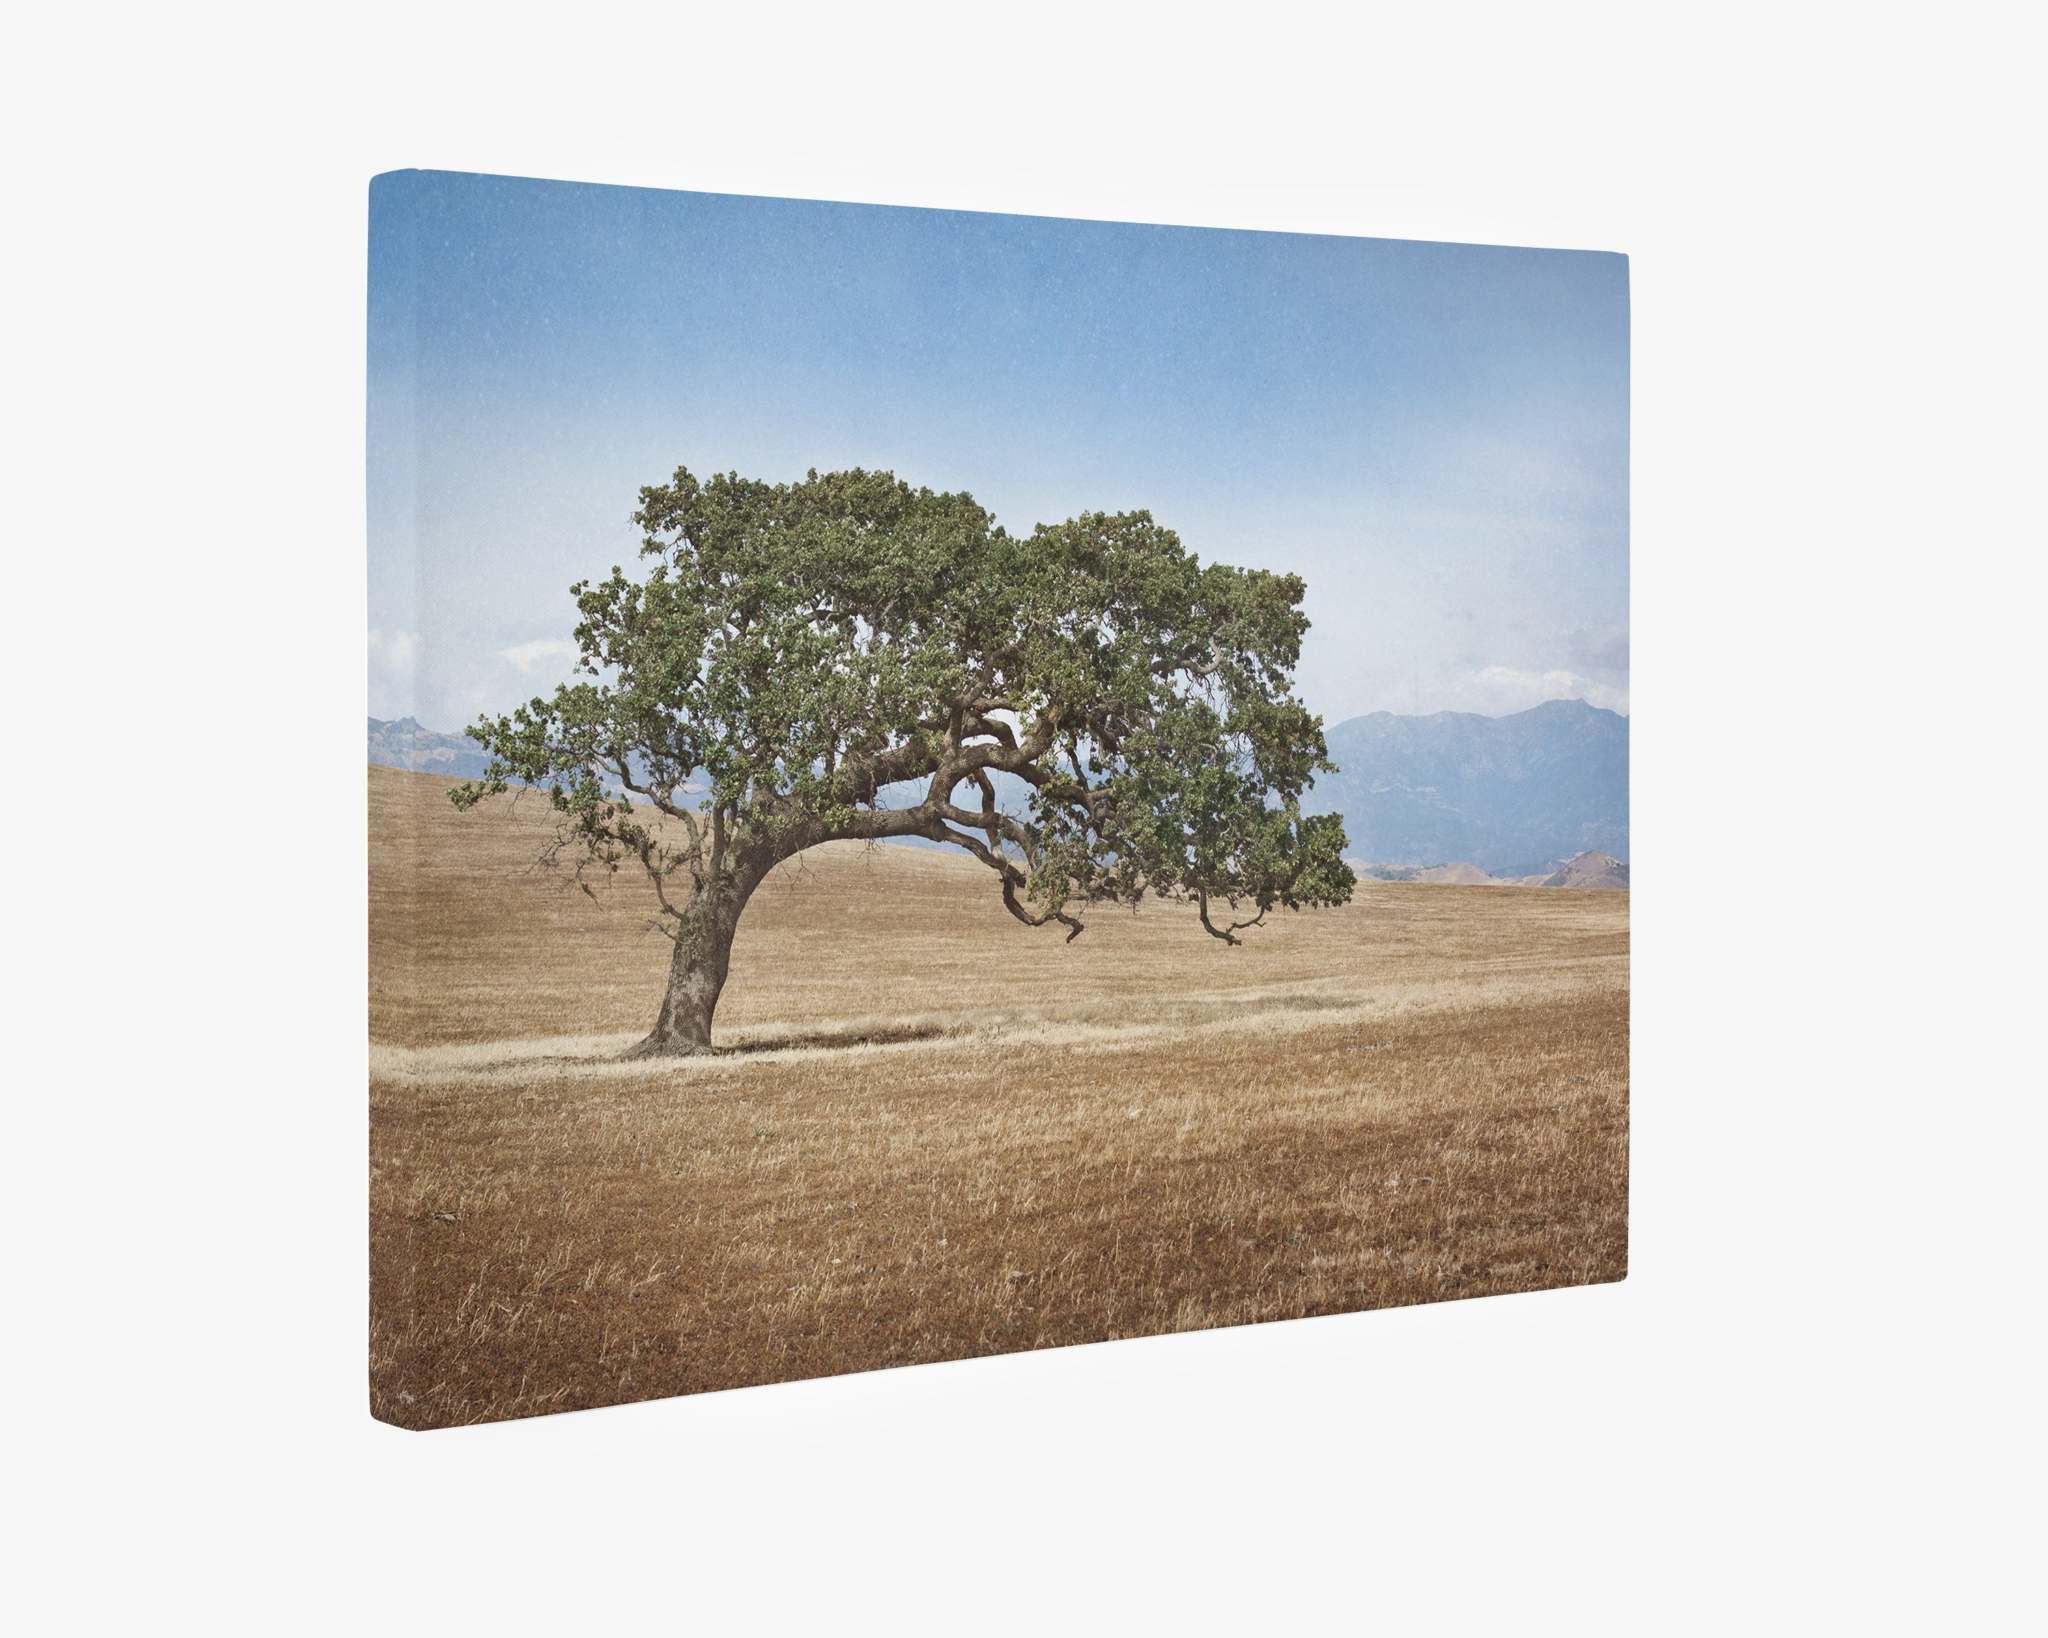 A lone tree with a sprawling canopy stands in a dry, empty field. The background features distant, hazy mountains under a clear blue sky. The image is presented as Offley Green&#39;s premium artist-grade California Landscape Wall Art, Oak Tree Canvas &#39;Windswept,&#39; capturing the essence of California Oaks.